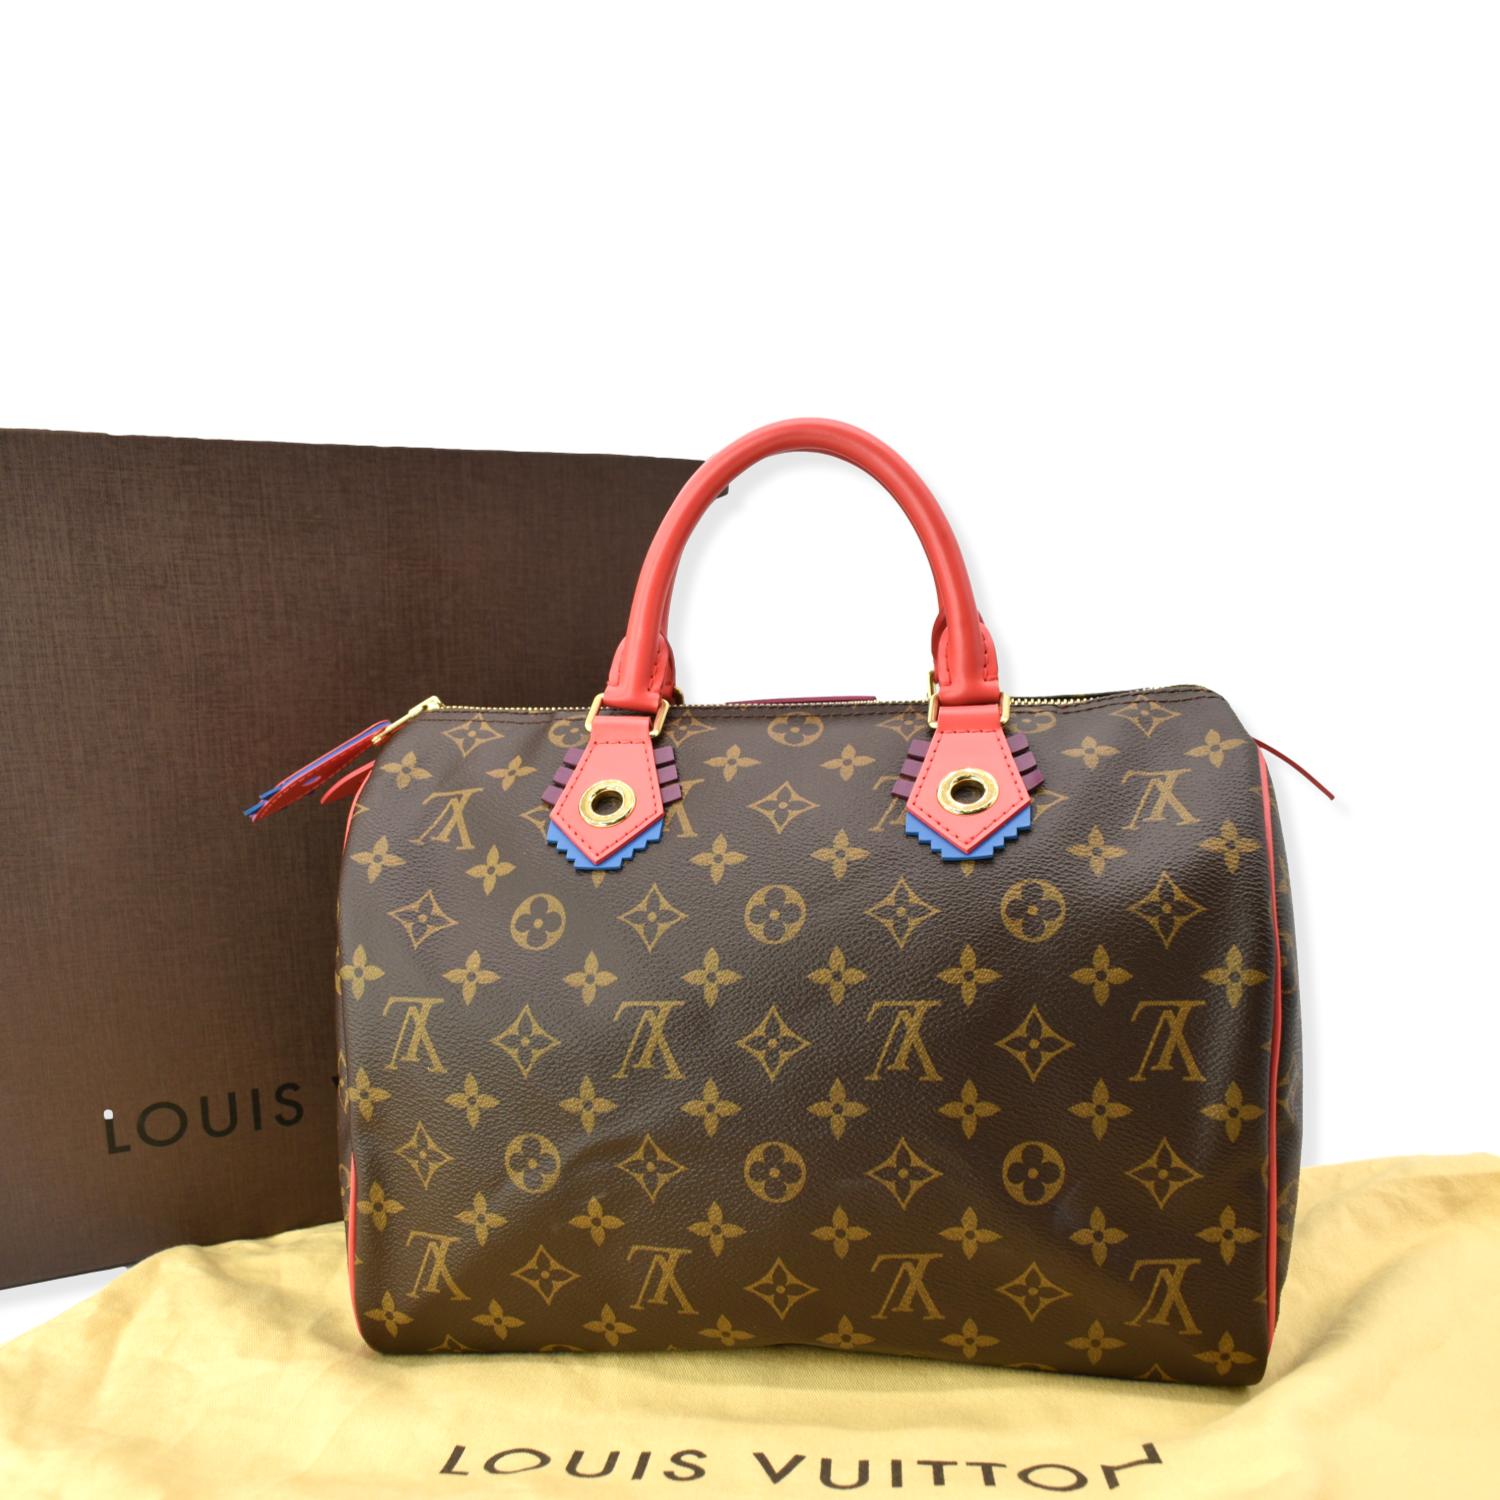 The truth about the Louis Vuitton Speedy Bandoulière 30 